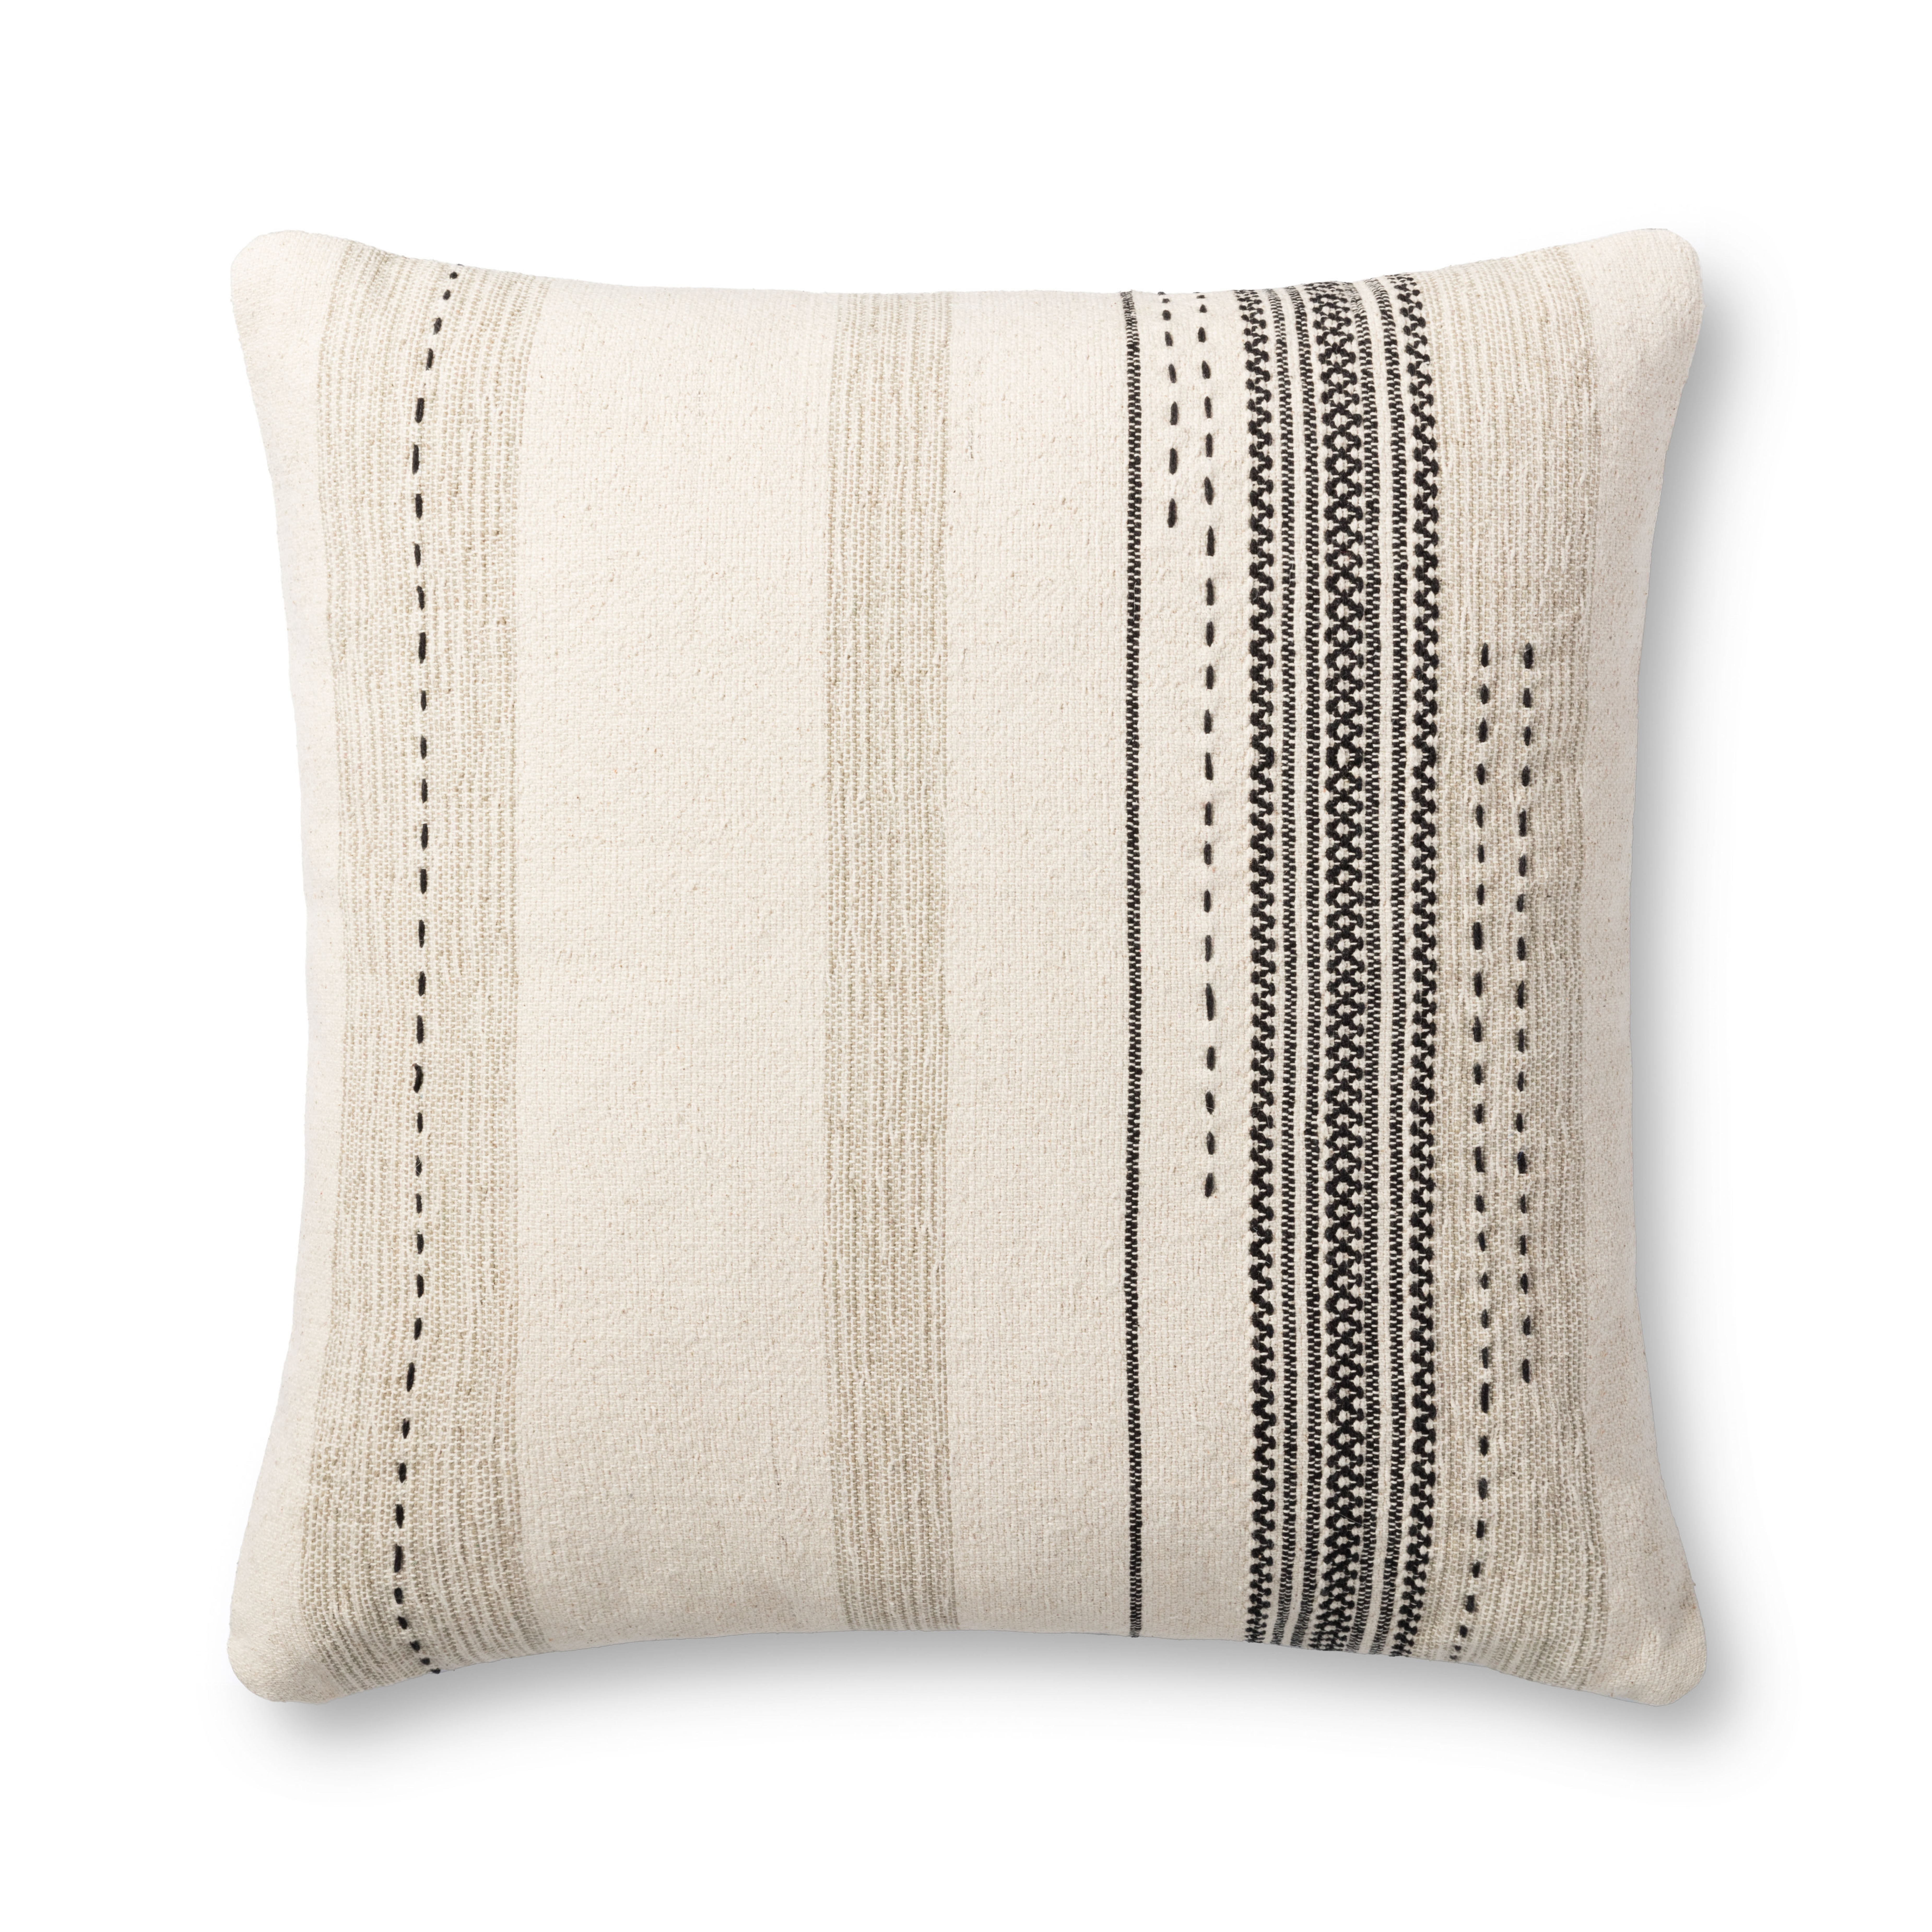 PILLOWS P1150 NATURAL / BLACK 22" x 22" Cover w/Poly - Magnolia Home by Joana Gaines Crafted by Loloi Rugs